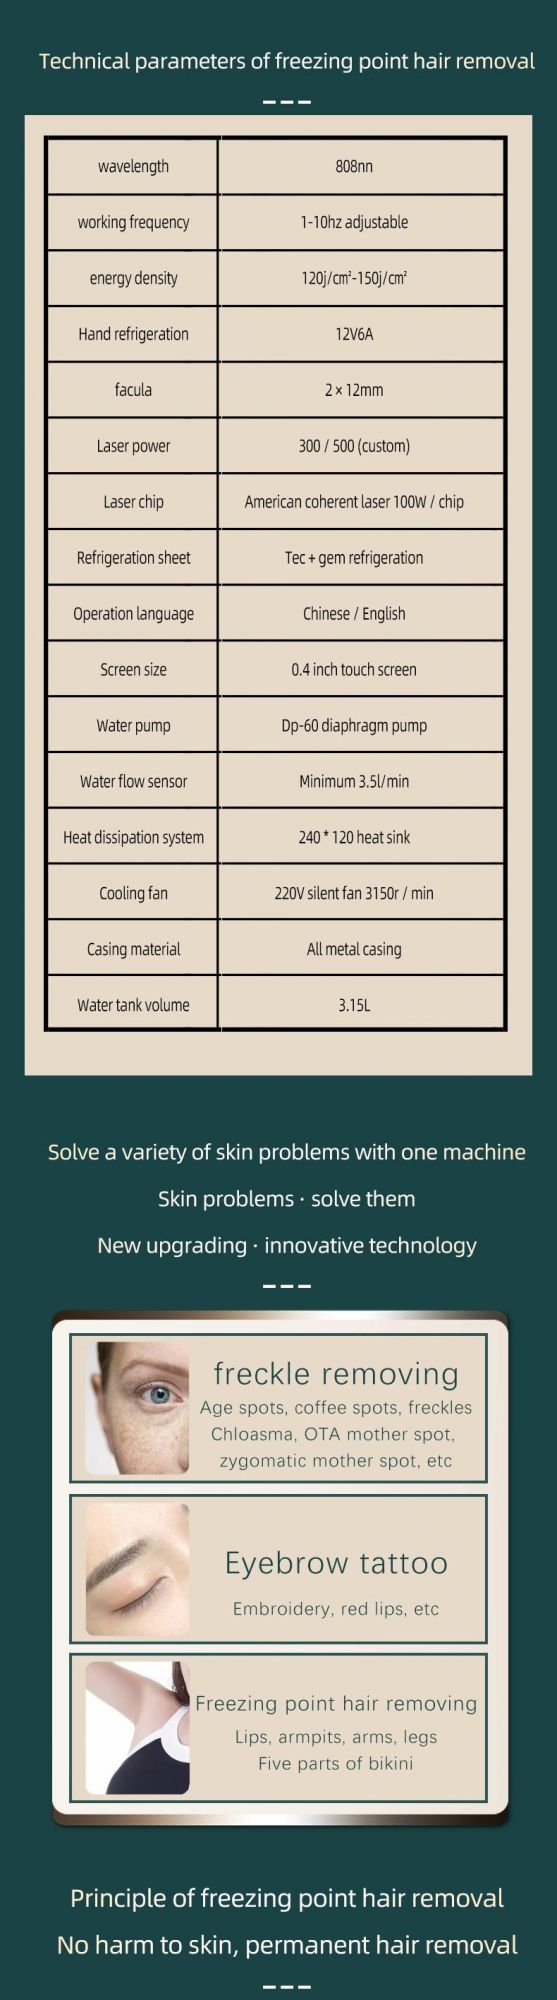 2022 Newest Diode Laser Painless Hair Removal 808 Diode Laser 3 Wavelength 755 808 1064 Diode Laser Hair Removal Machine